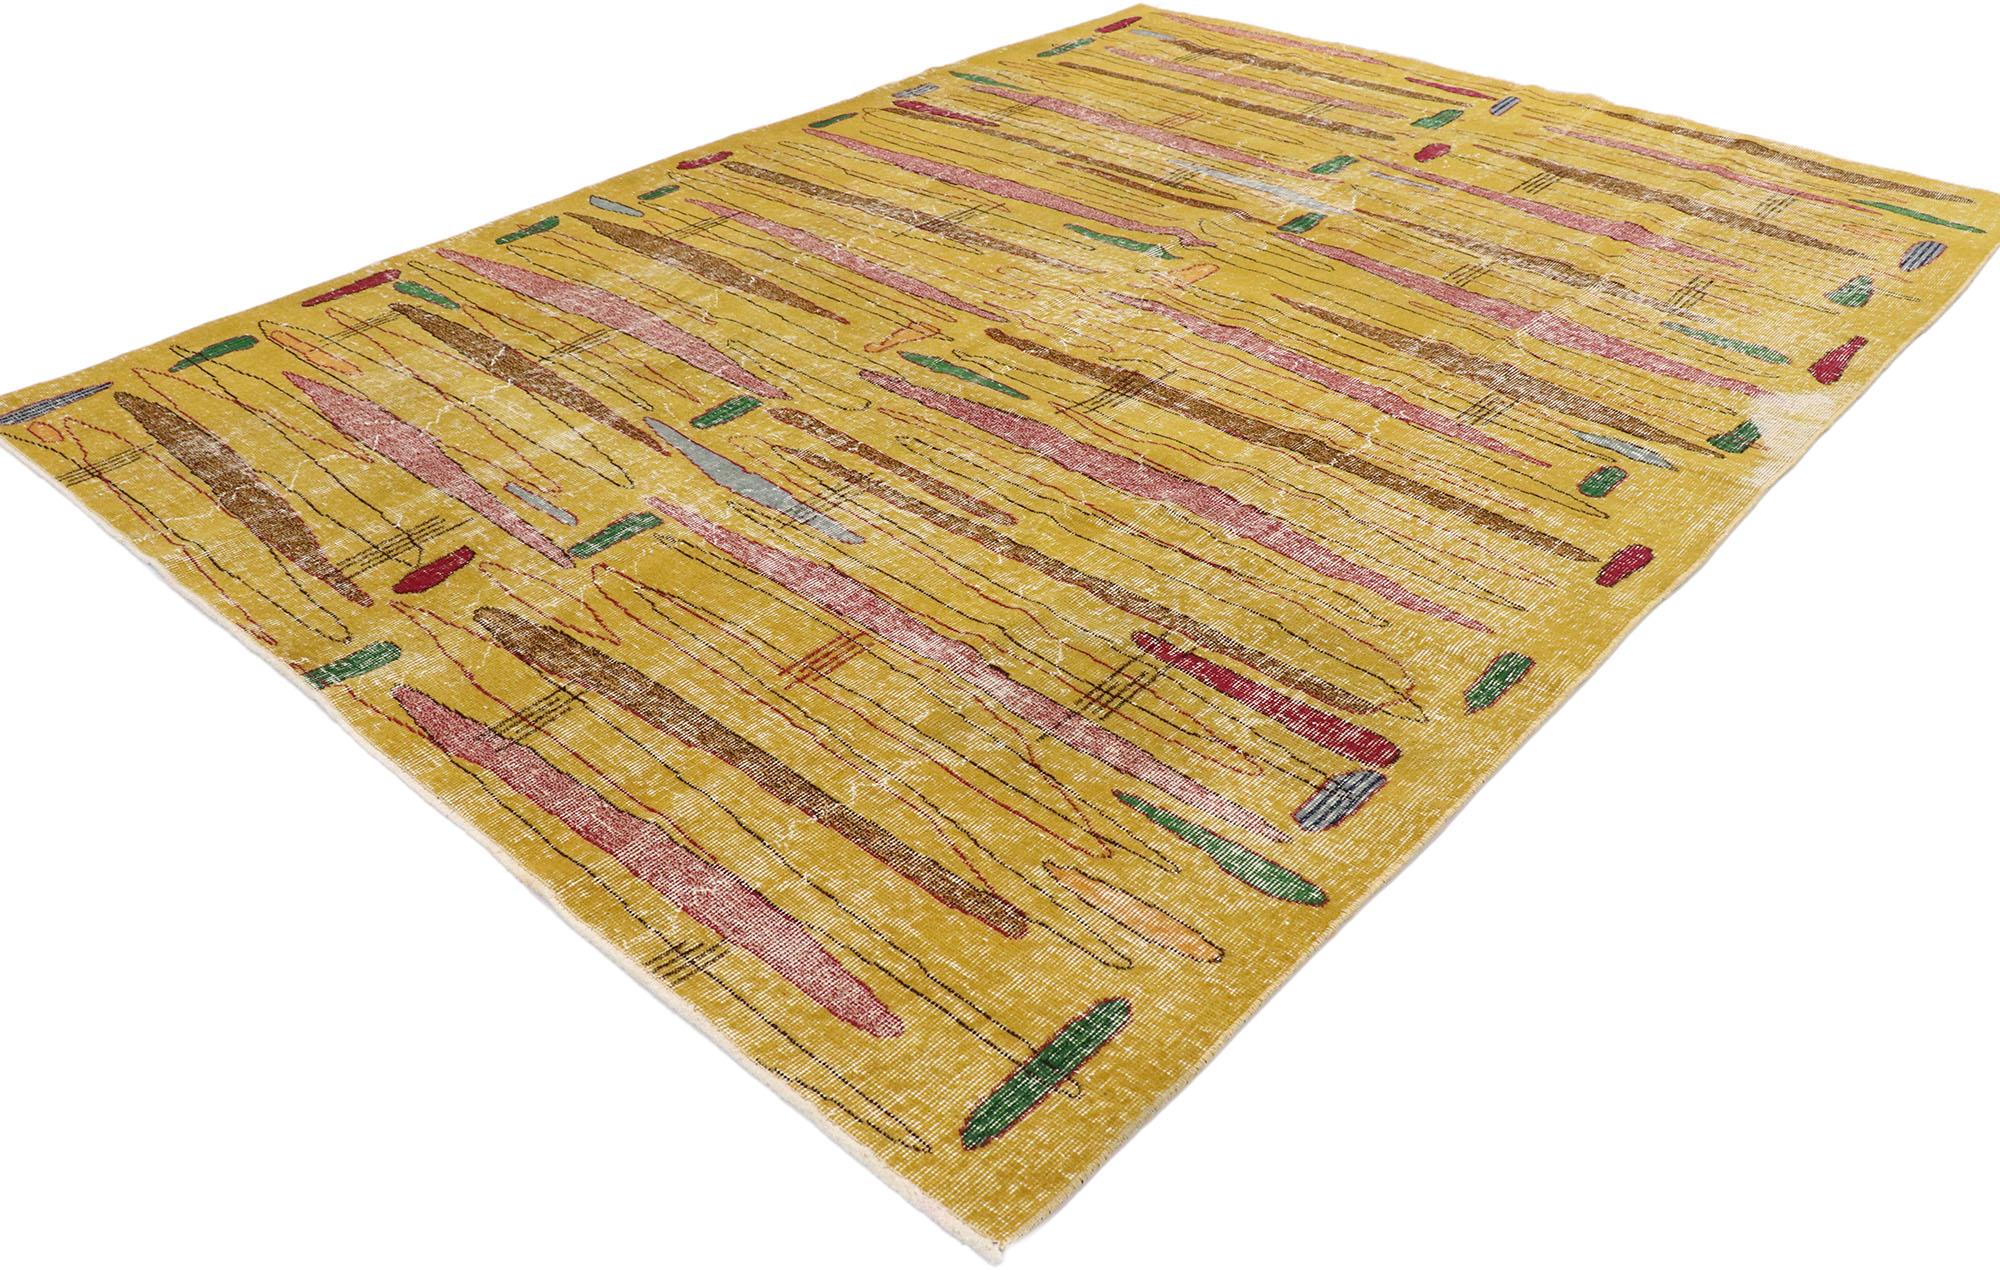 53276 Zeki Muren distressed vintage Turkish Sivas rug with Retro Art Deco style. With its geometric pattern, bold form and vibrant colors, this hand knotted wool distressed vintage Turkish Sivas rug beautifully highlights true Art Deco style. The